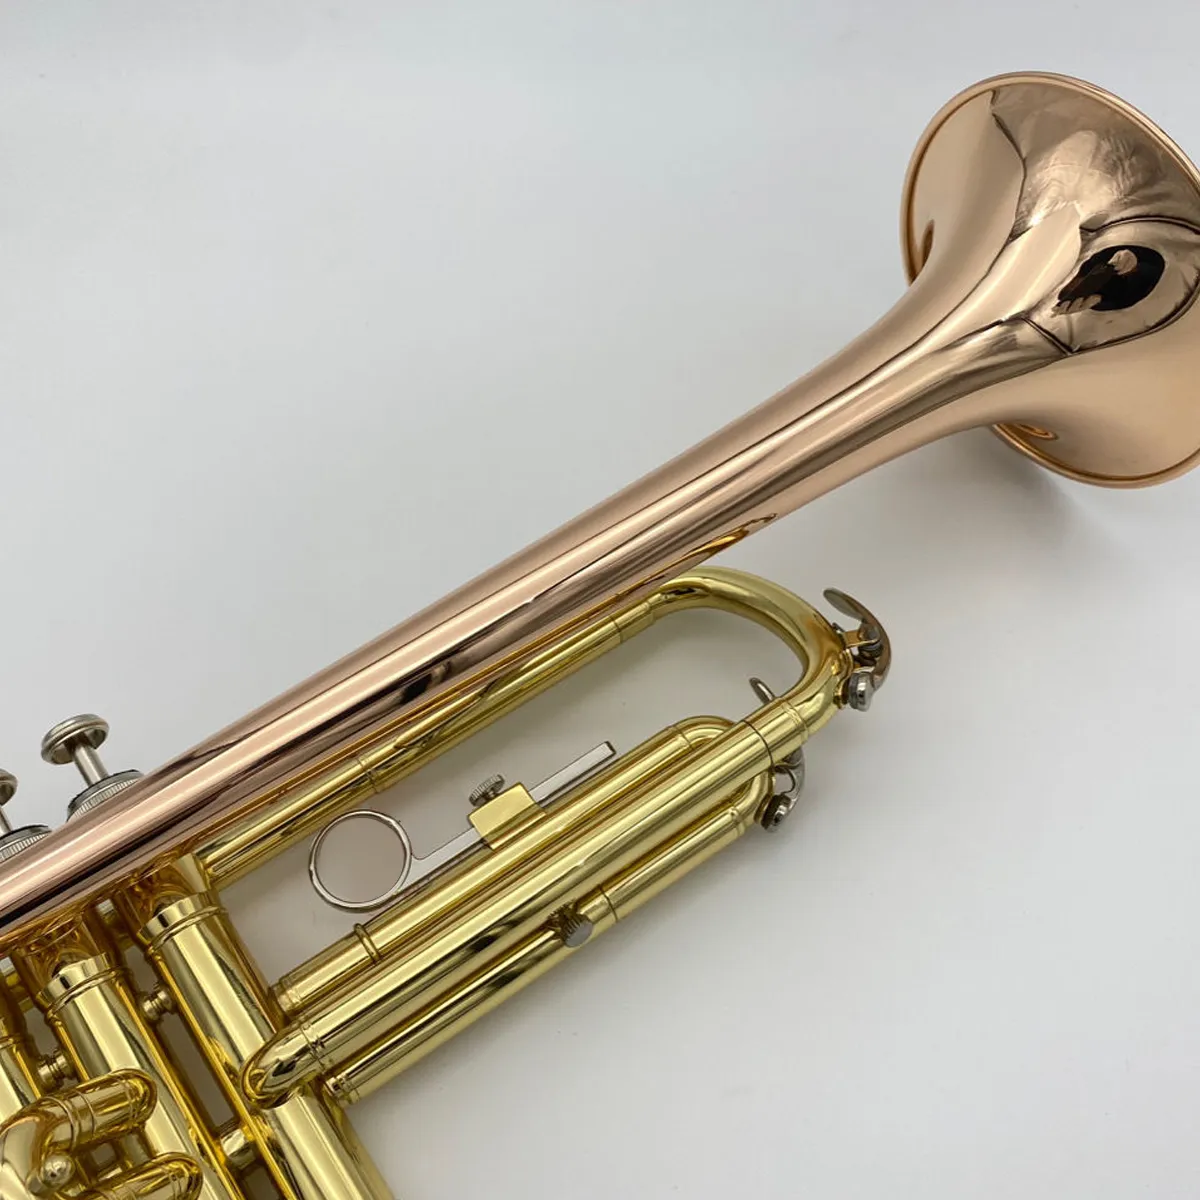 Highquality professional trumpet instrument for beginners to play goldplated phosphor bronze reverse grip lefthand trumpet8985323